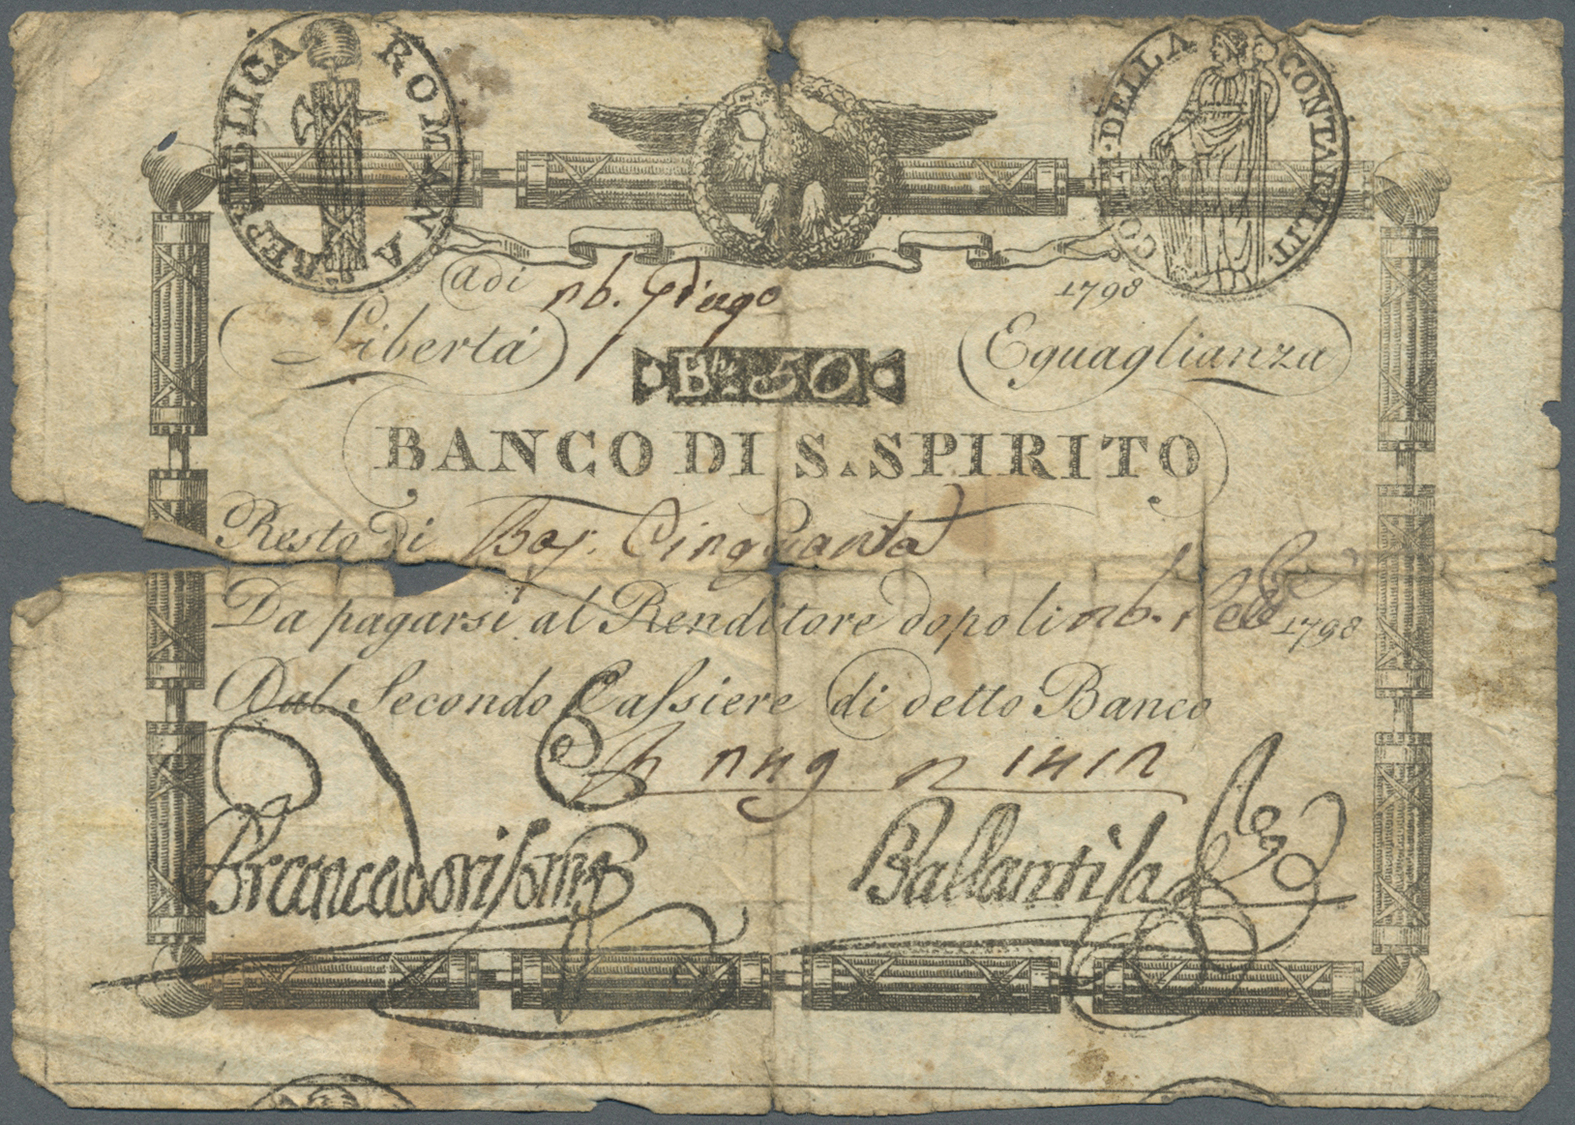 01278 Italy / Italien: Set of 9 banknotes of the Papal issues in italy dated 1798 containing 3x 50 Baiocchi 1798 P. S528